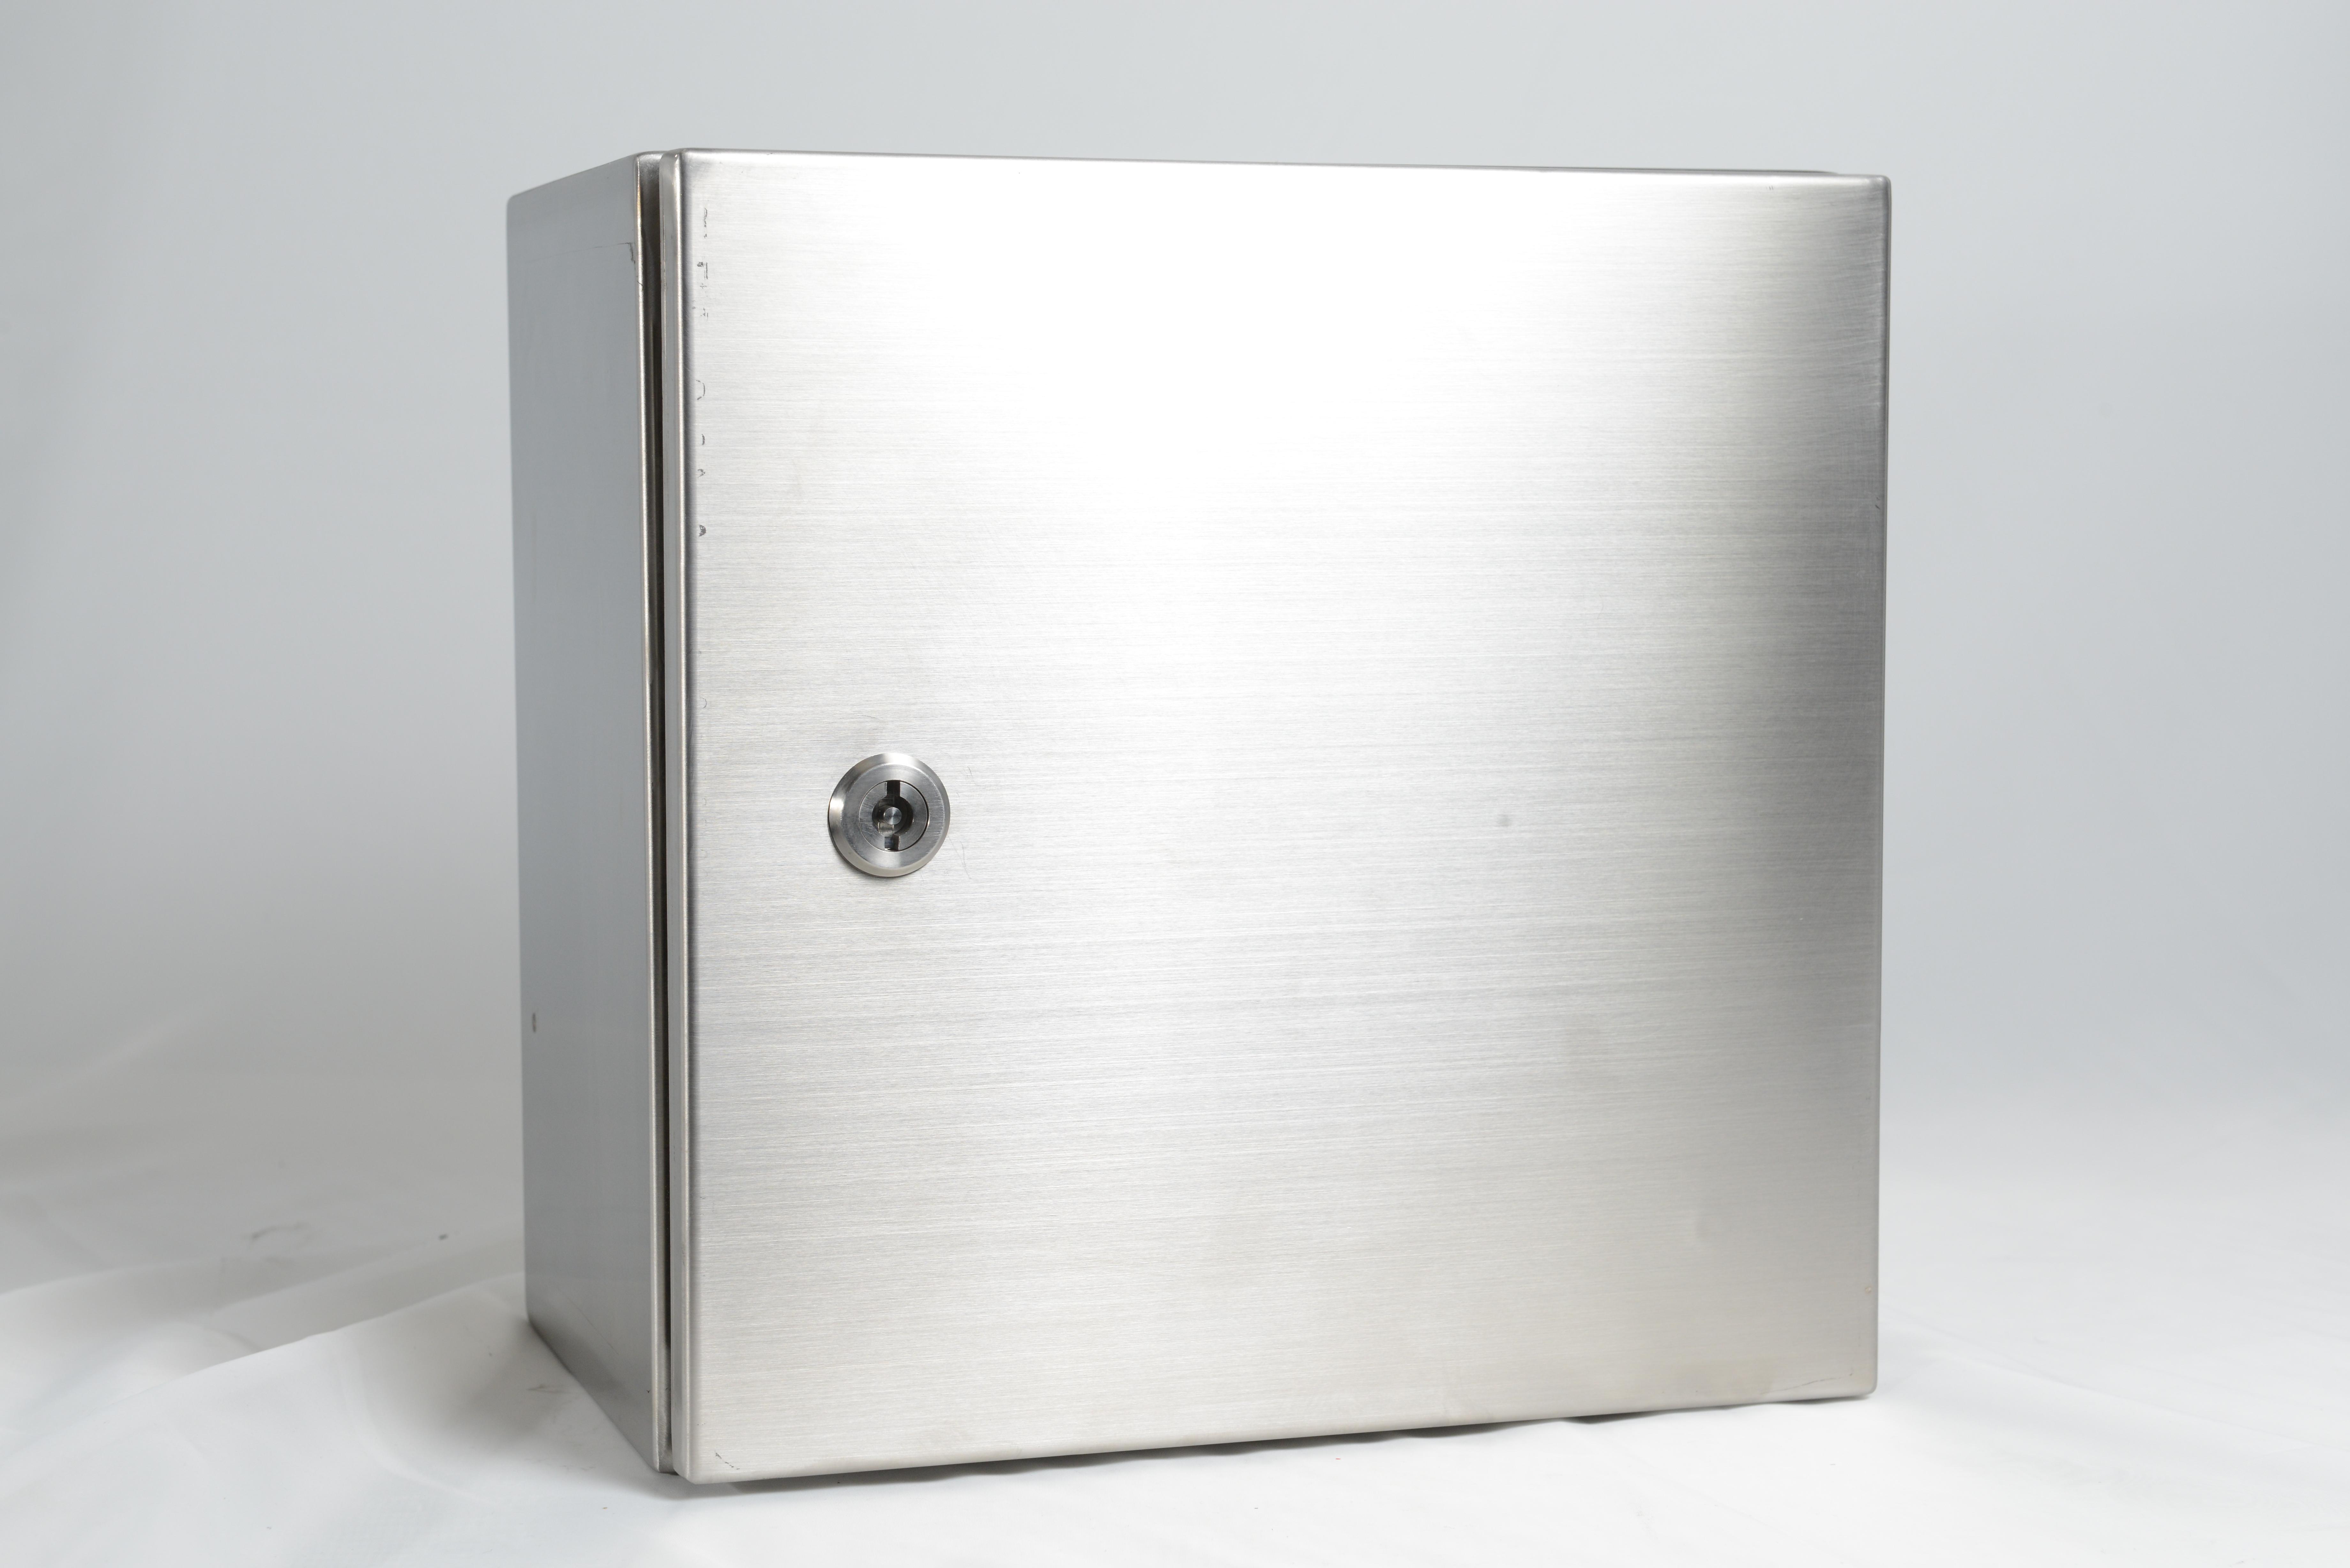 RCG stainless steel enclosure 316 grade 250x200x150mm - wall mounting